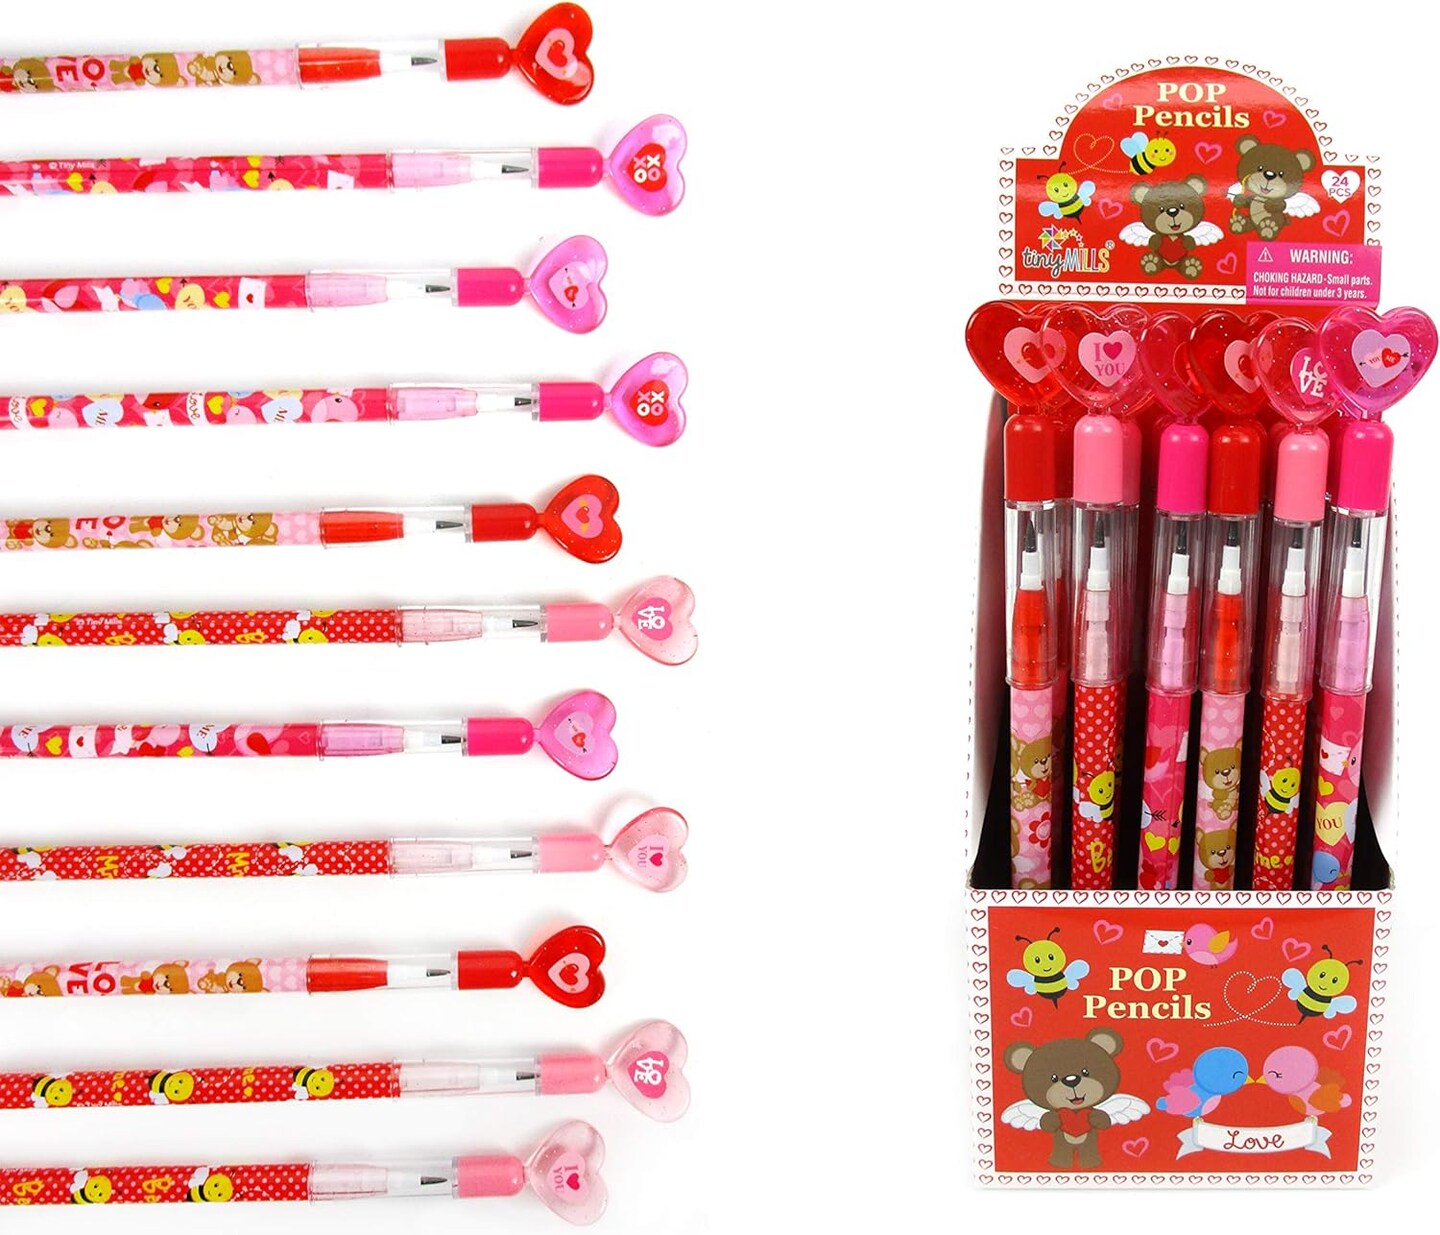 TINYMILLS 24 Pcs Valentine's Day Heart Multi Point Pencils Party